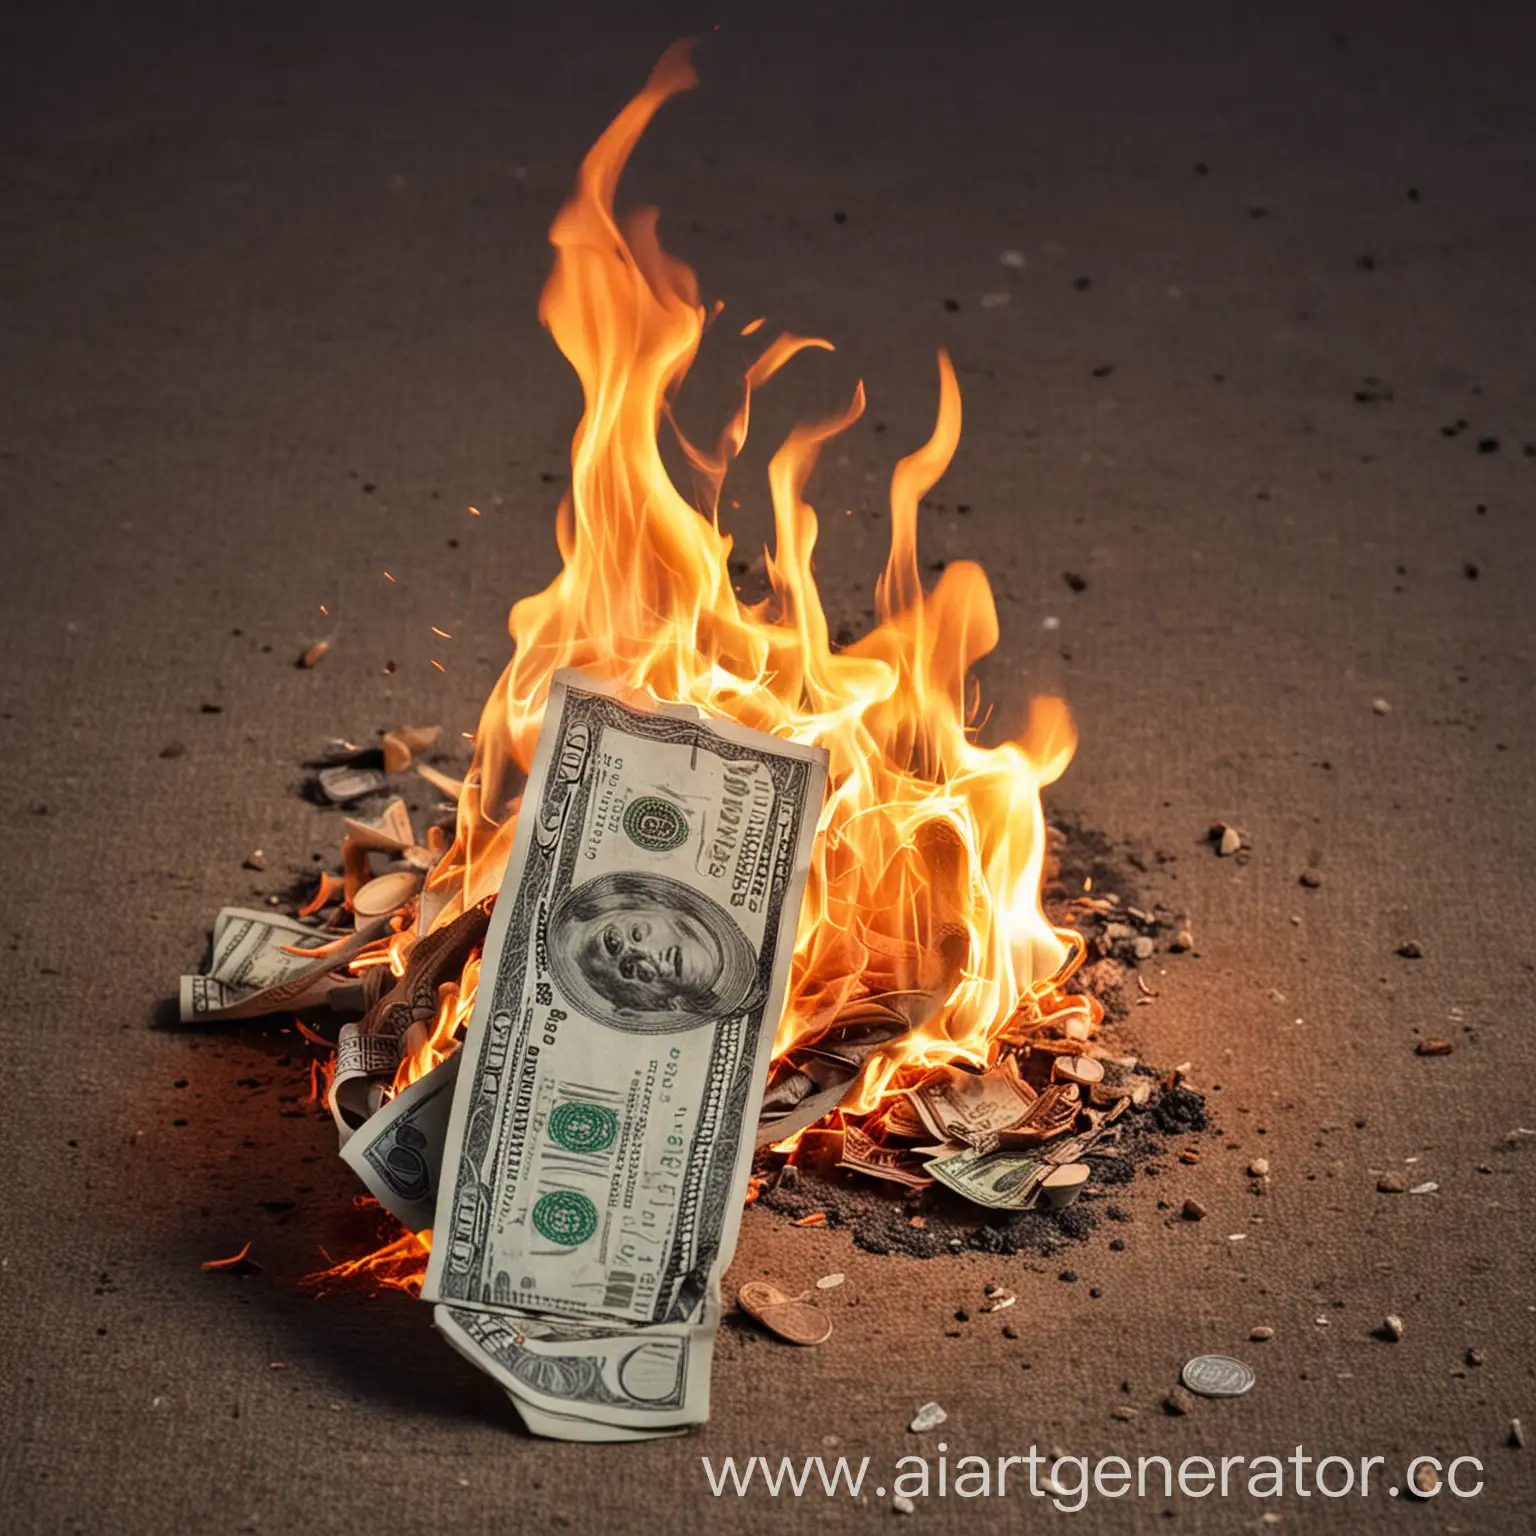 Flames-Engulfing-Currency-Symbolic-Depiction-of-Financial-Crisis